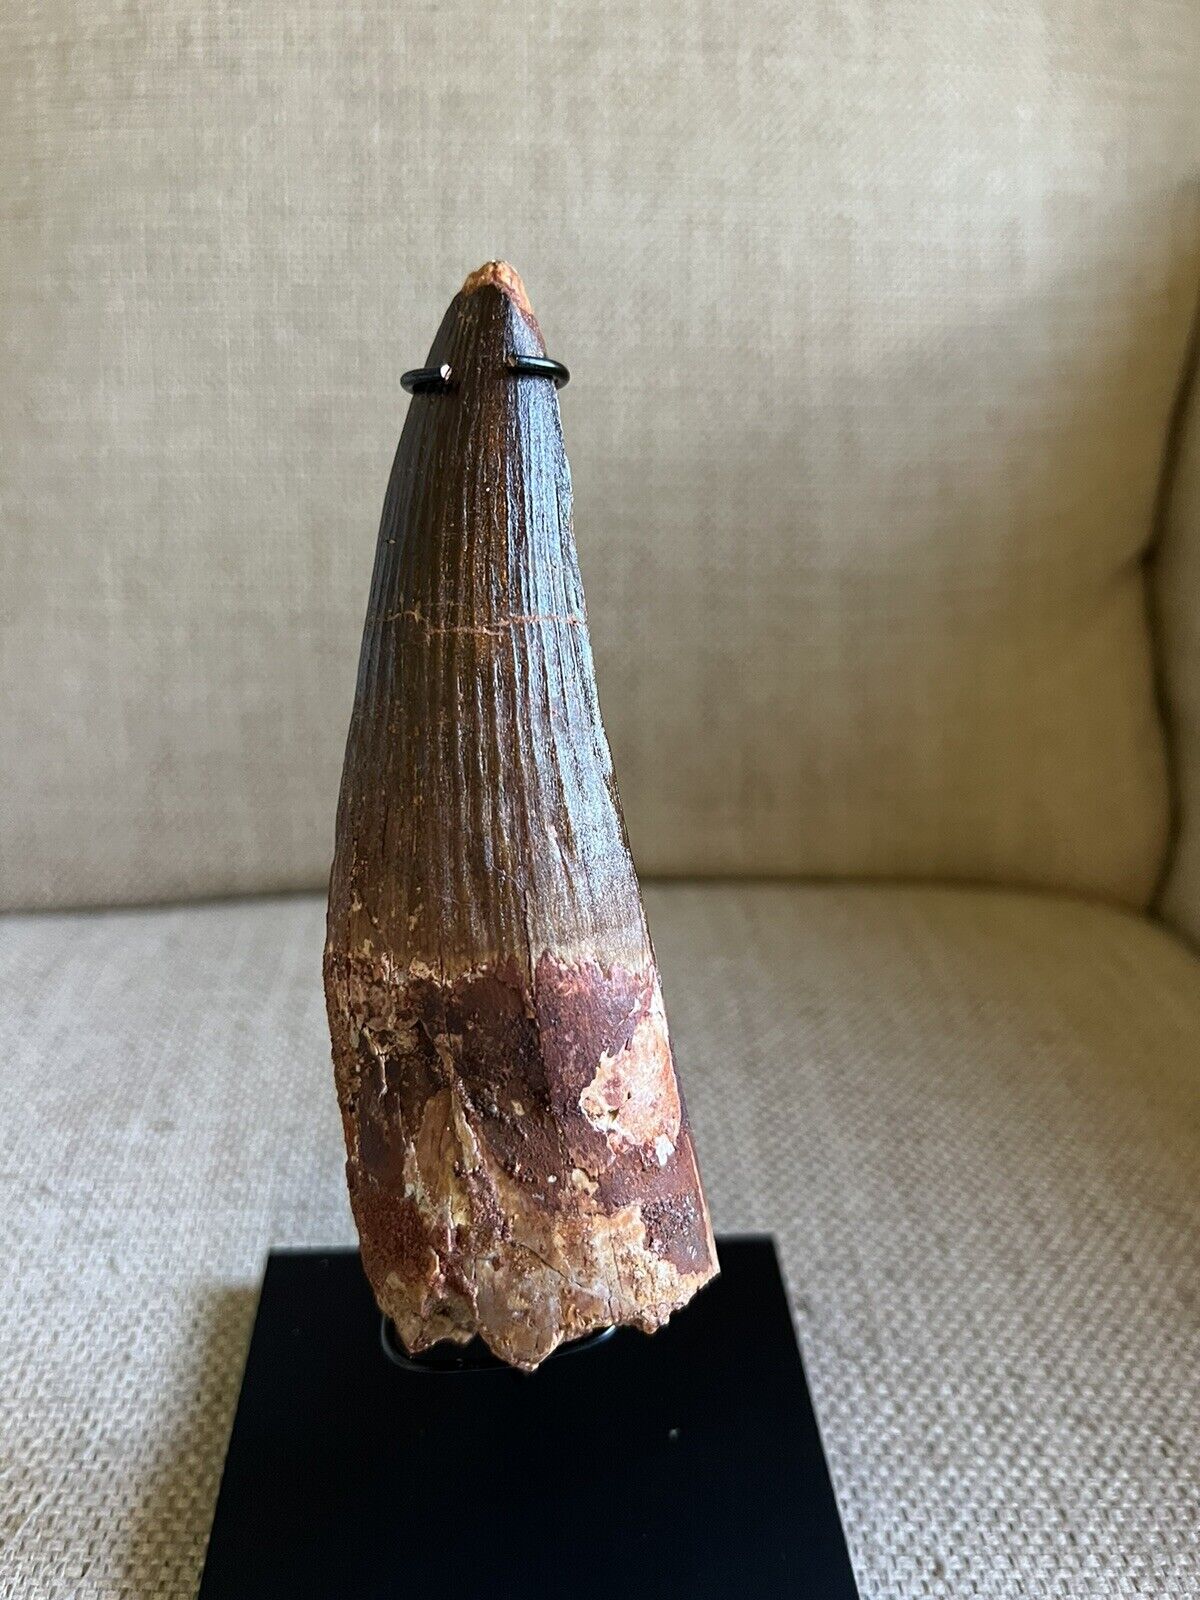 Best Of The Best, Massive, All Natural 5.88” Rooted Spinosaurus Tooth